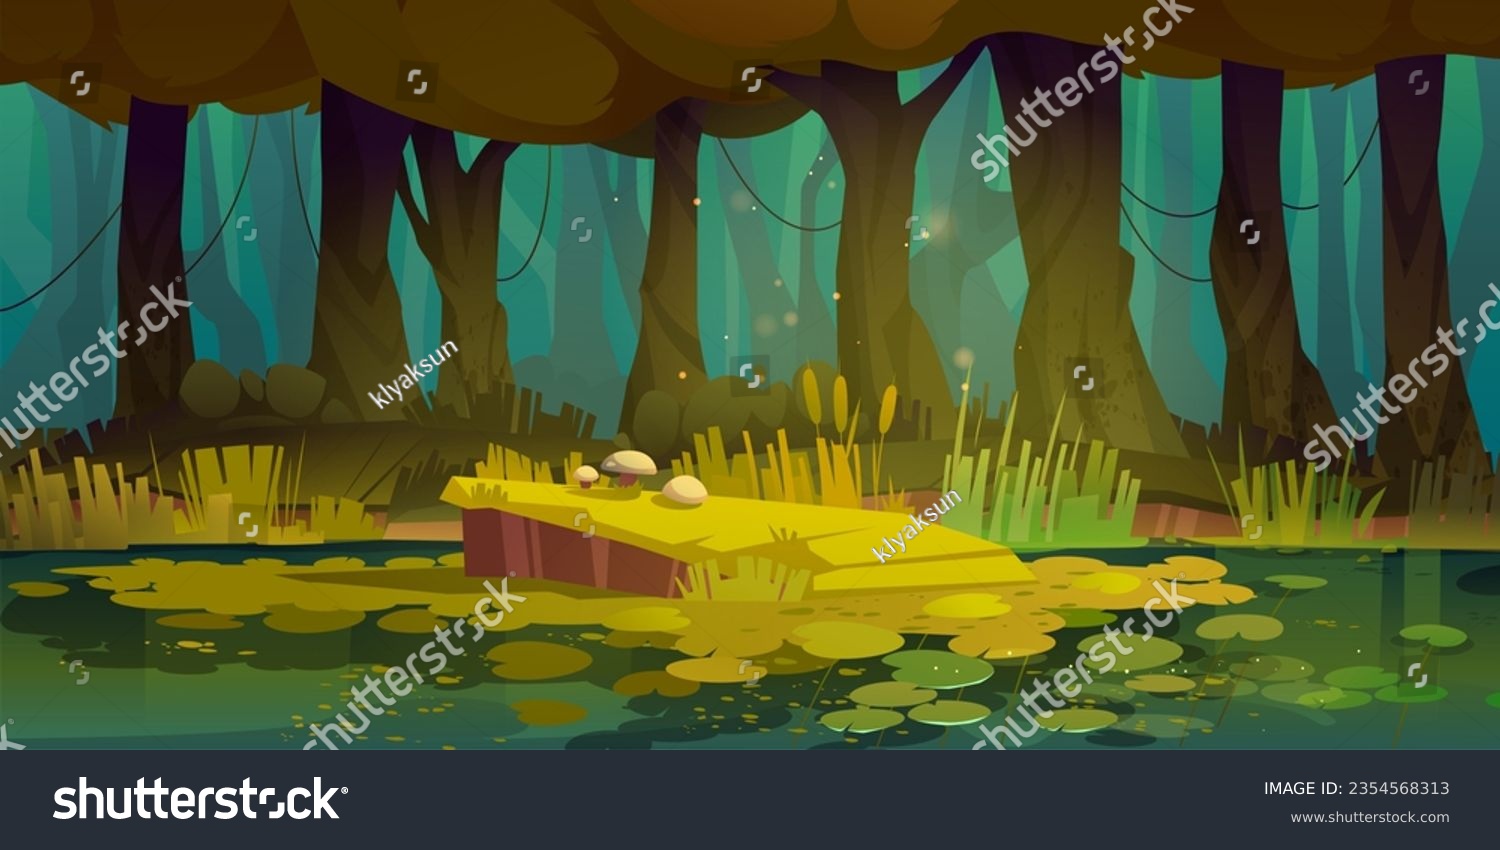 Forest swamp horizontal background - cartoon vector illustration of summer fantasy spooky landscape with trees, lake and water lilies. Jungle game scene of pond with green grass and plants. #2354568313